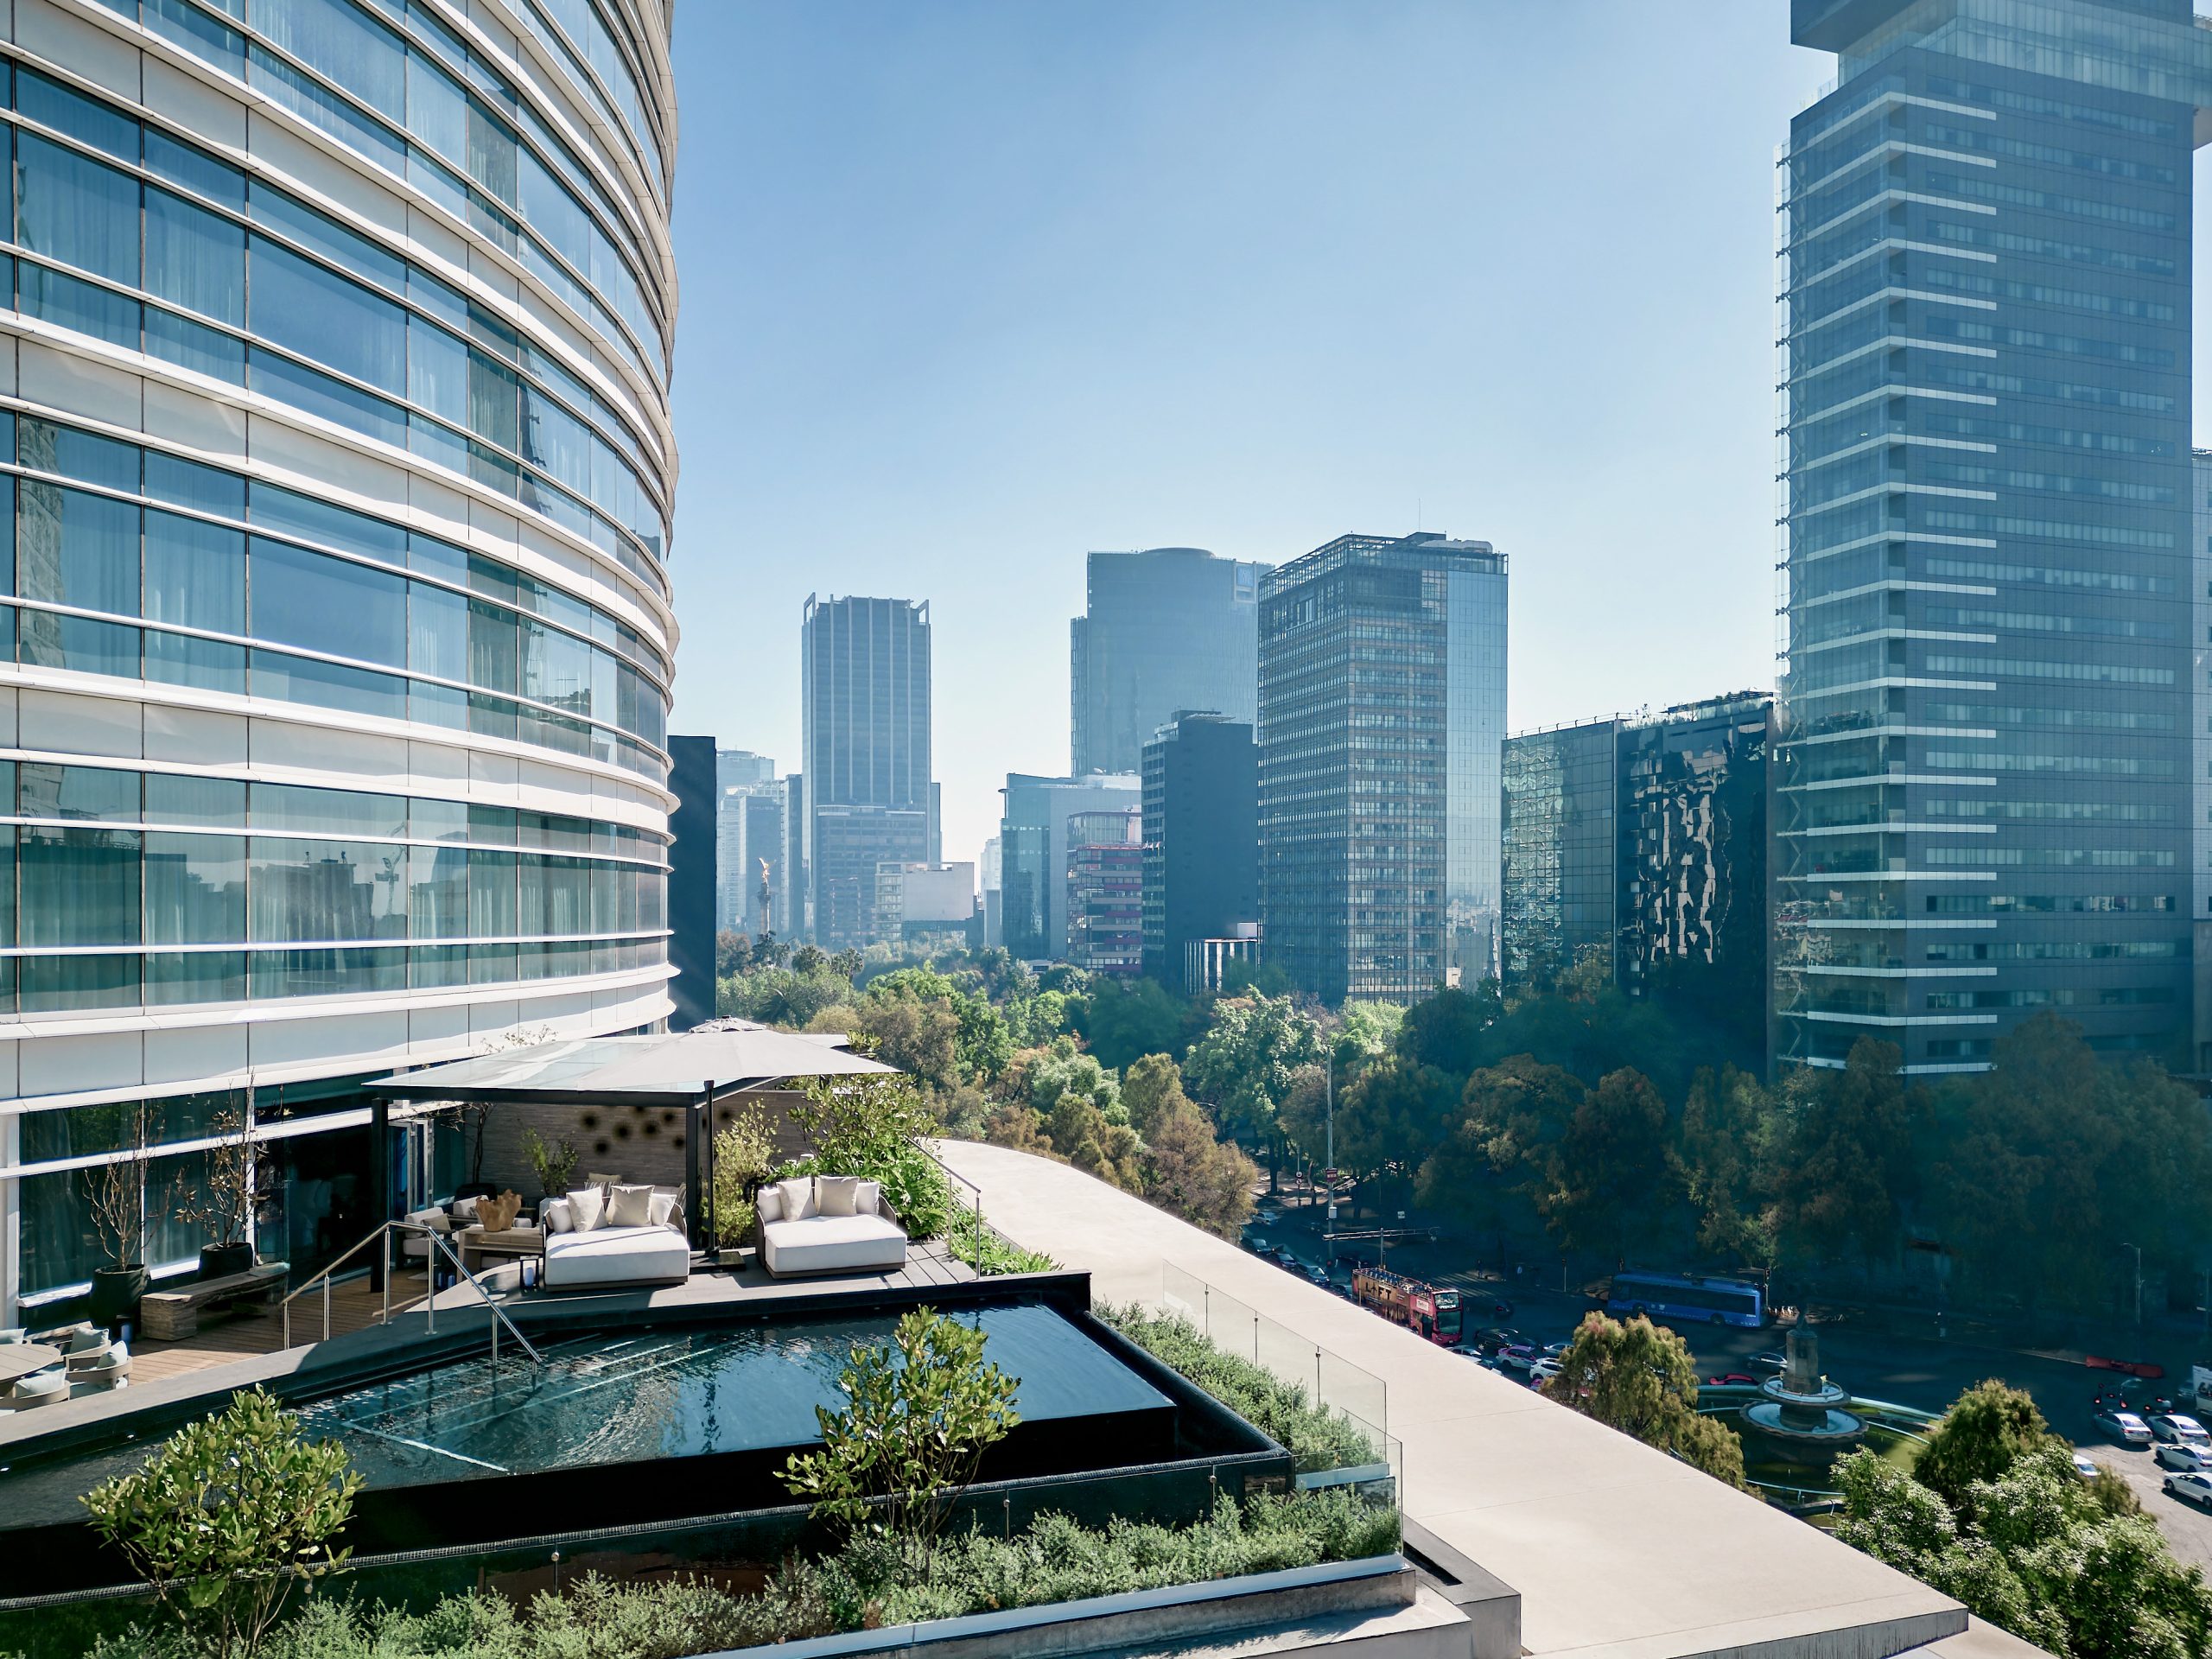 Oases in The Sky: The Garden Terrace Suites at the St. Regis Mexico City